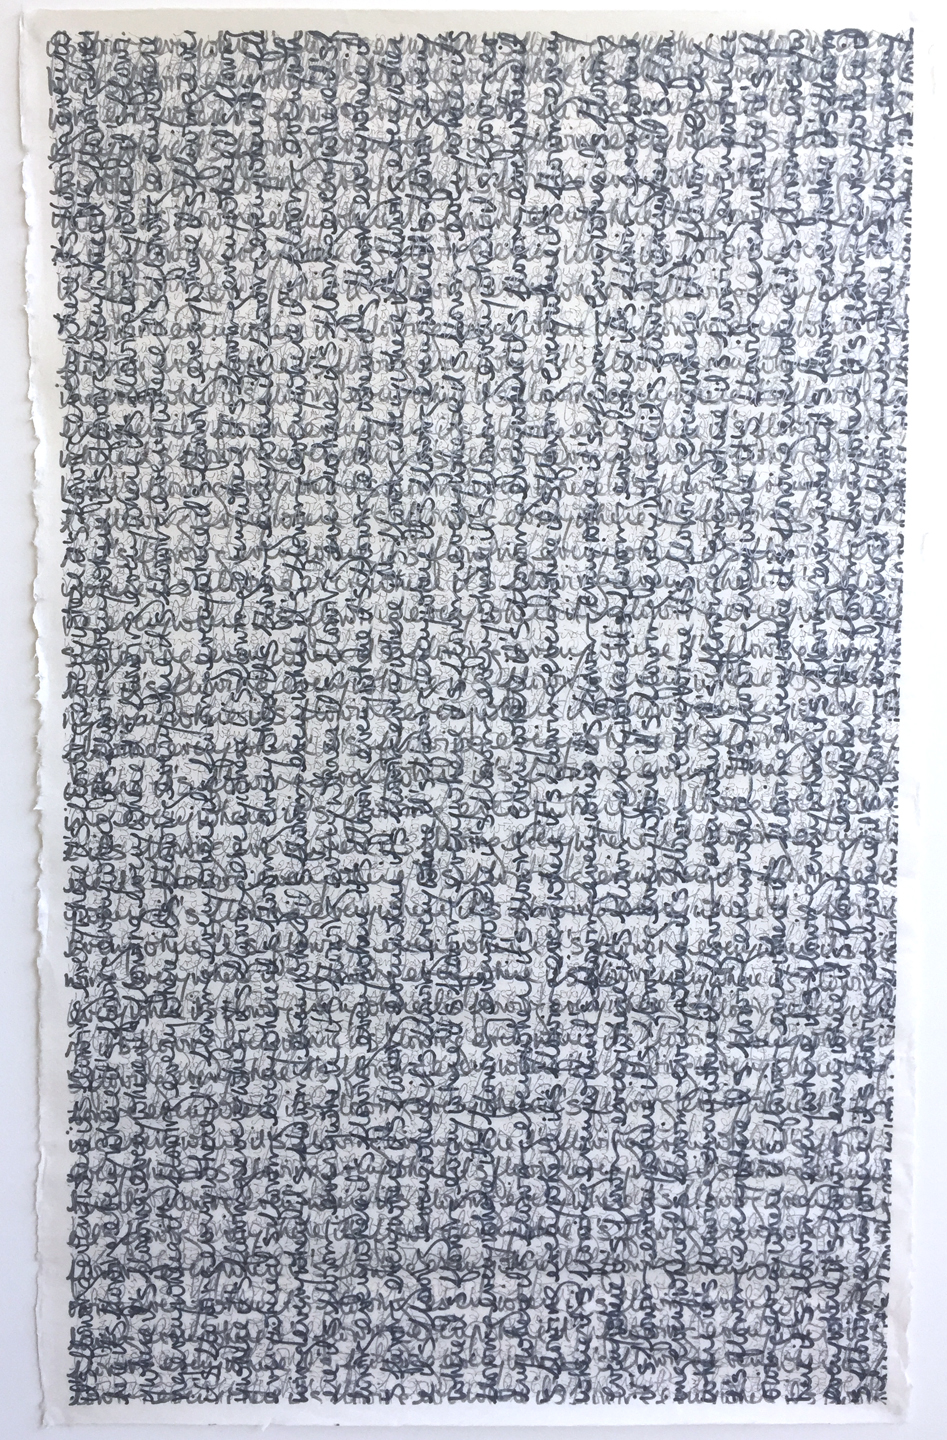 chpt. 34: it's flowing everywhere, 2018 | ink on kozo paper | 39.75" x 24.75"